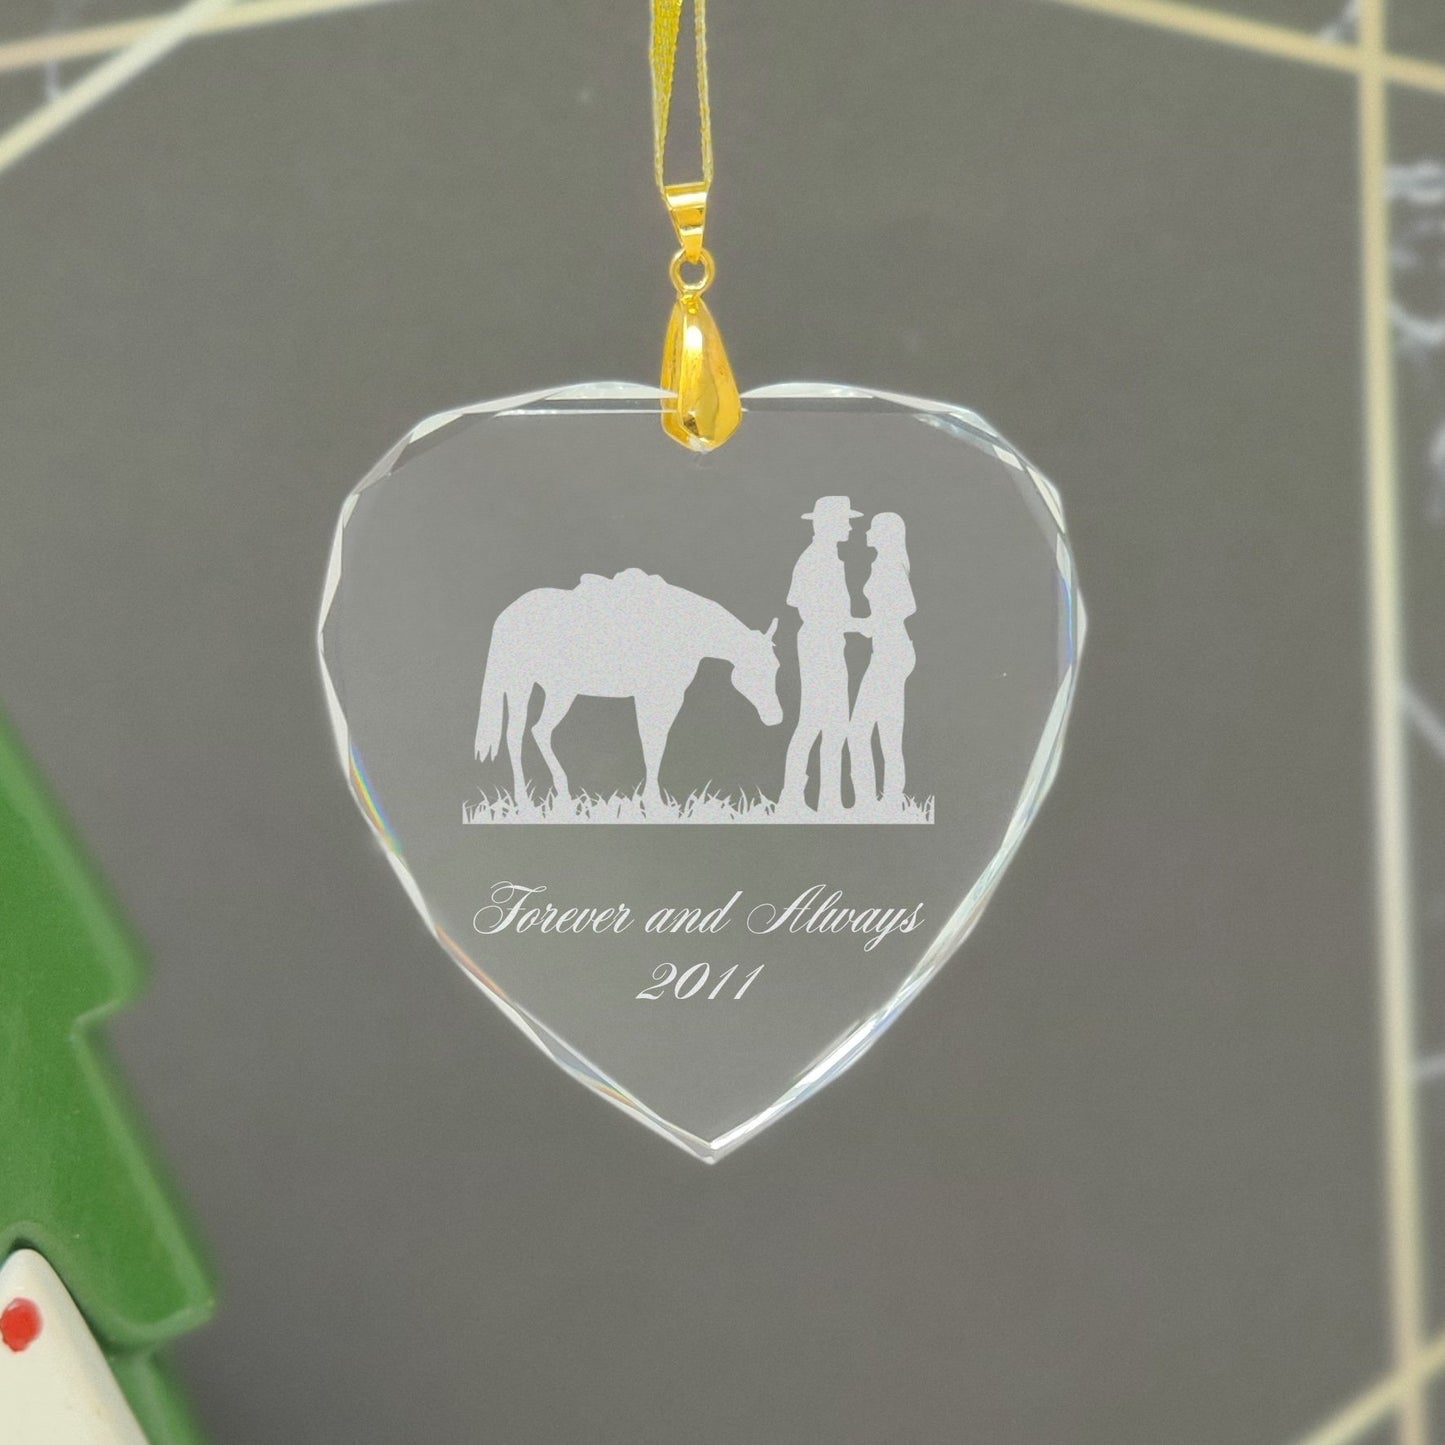 LaserGram Christmas Ornament, Moon, Personalized Engraving Included (Heart Shape)